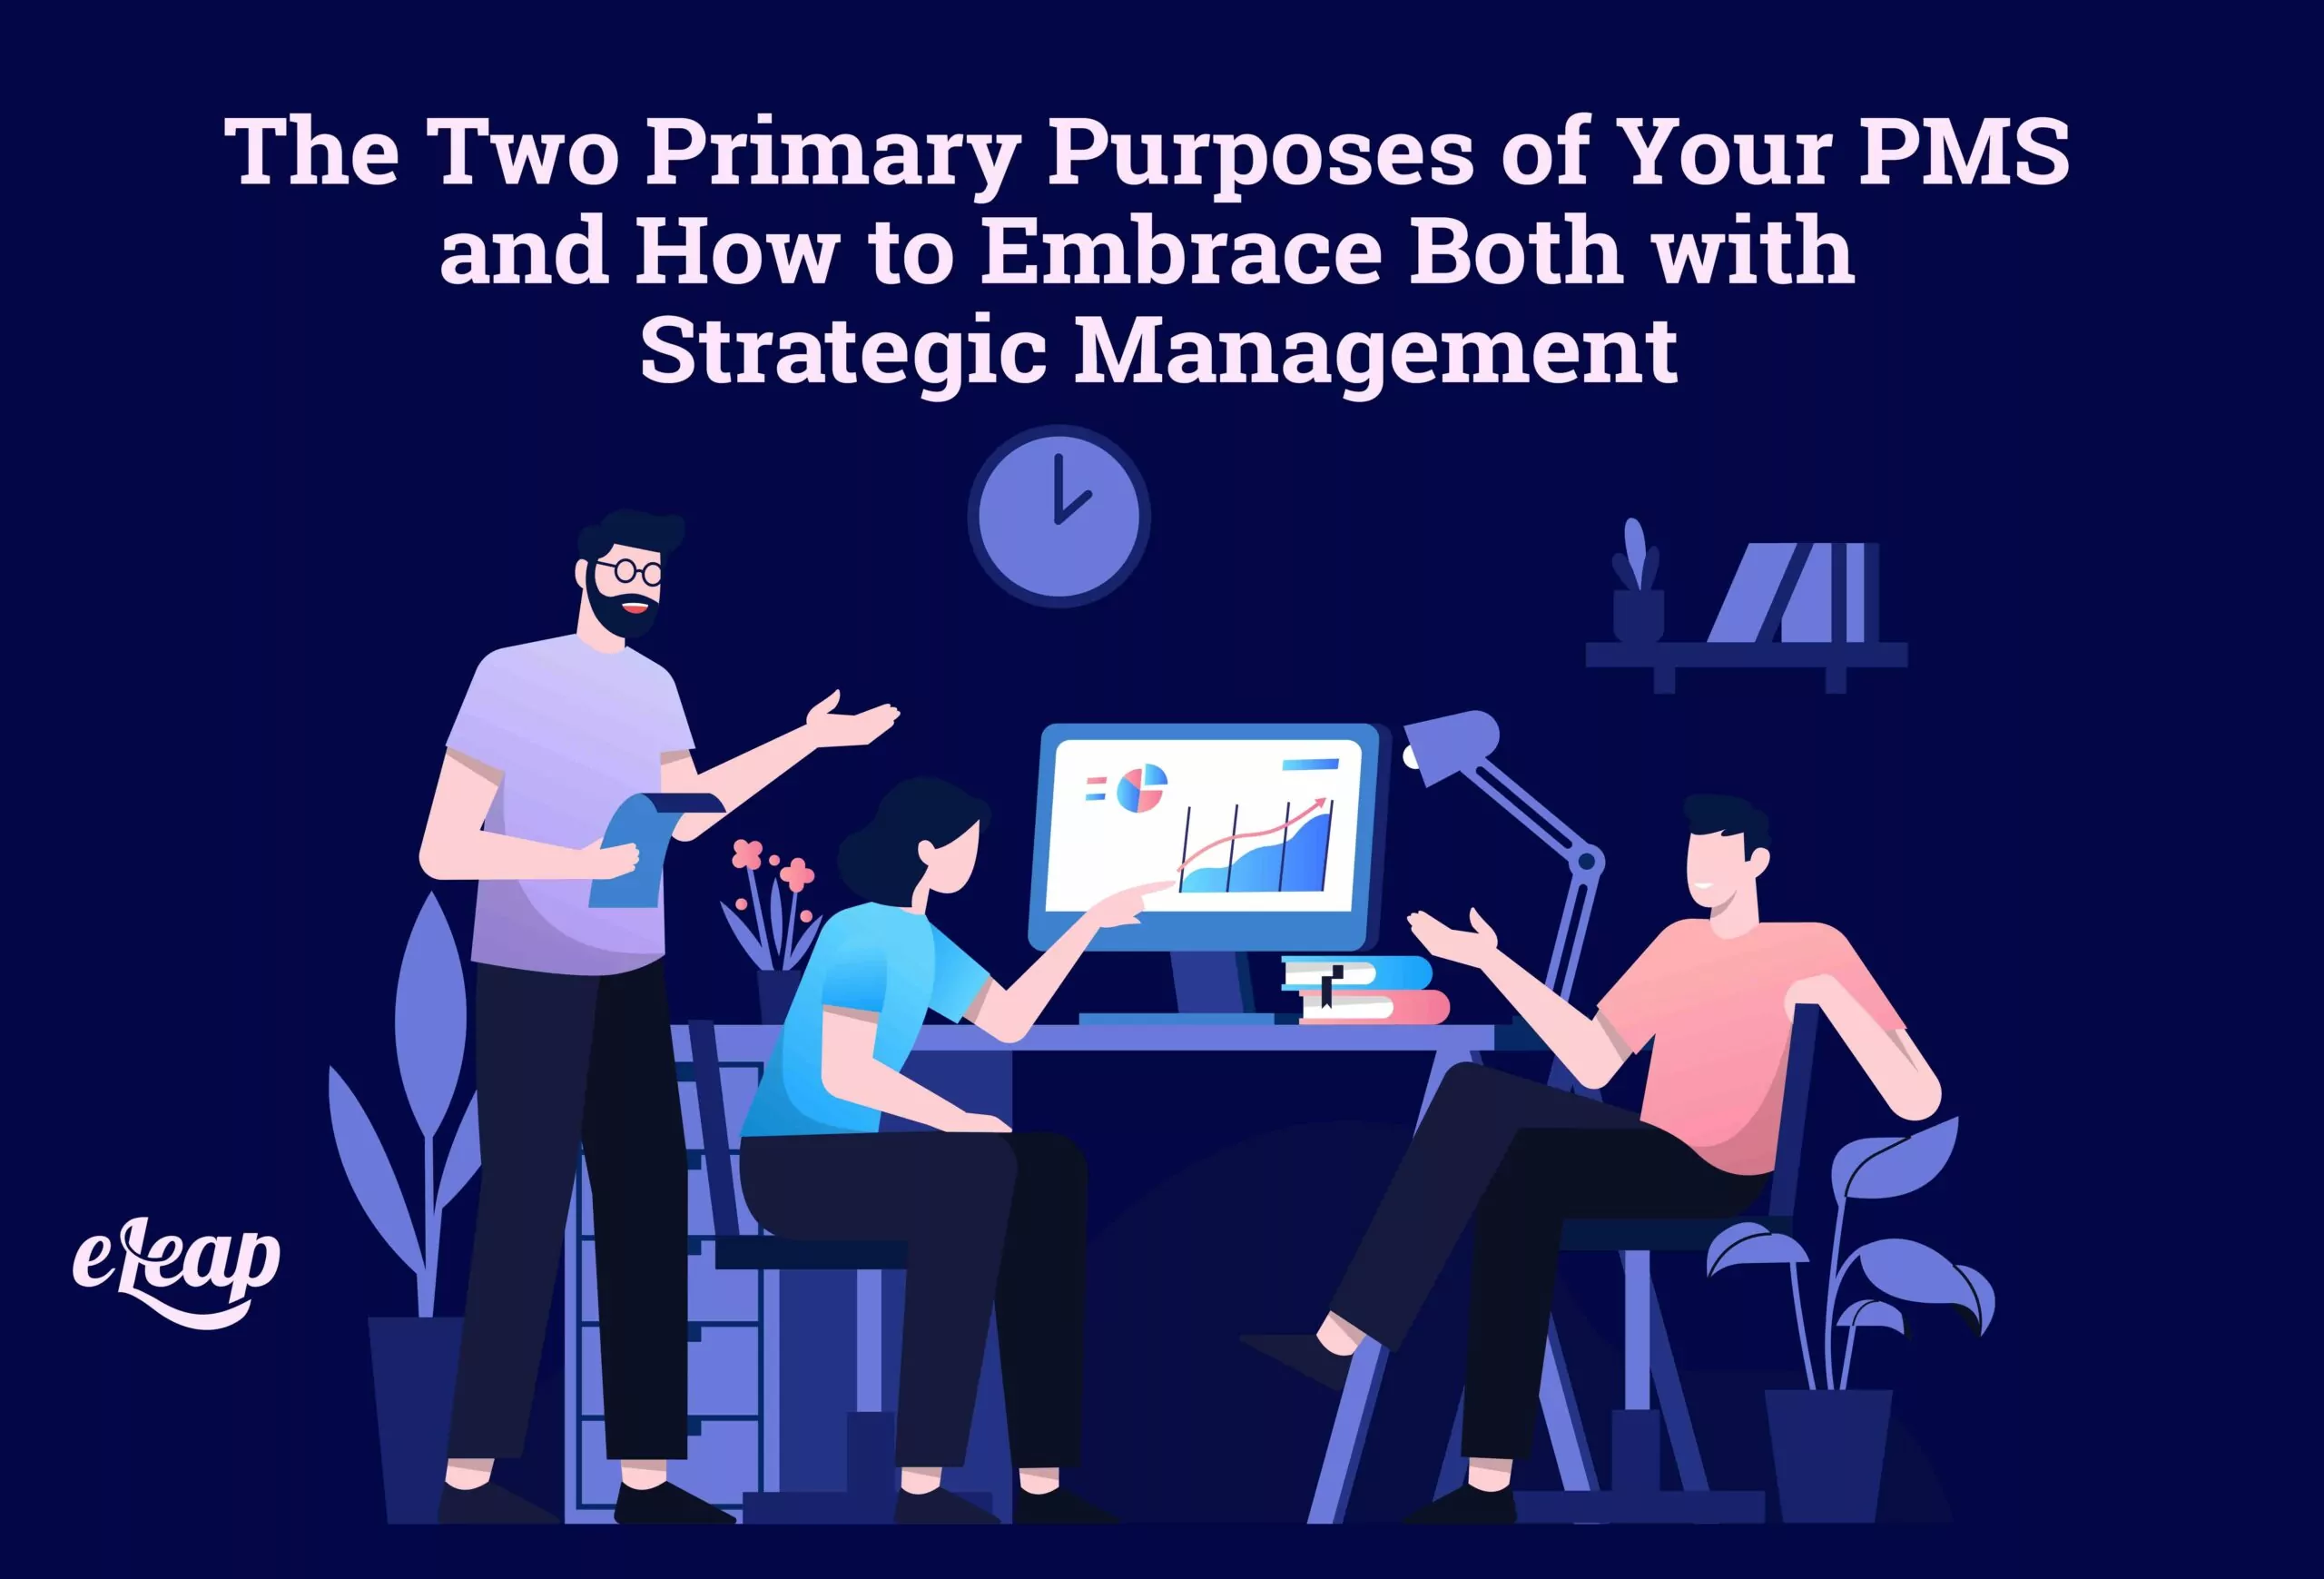 The Two Primary Purposes of Your PMS and How to Embrace Both with Strategic Management